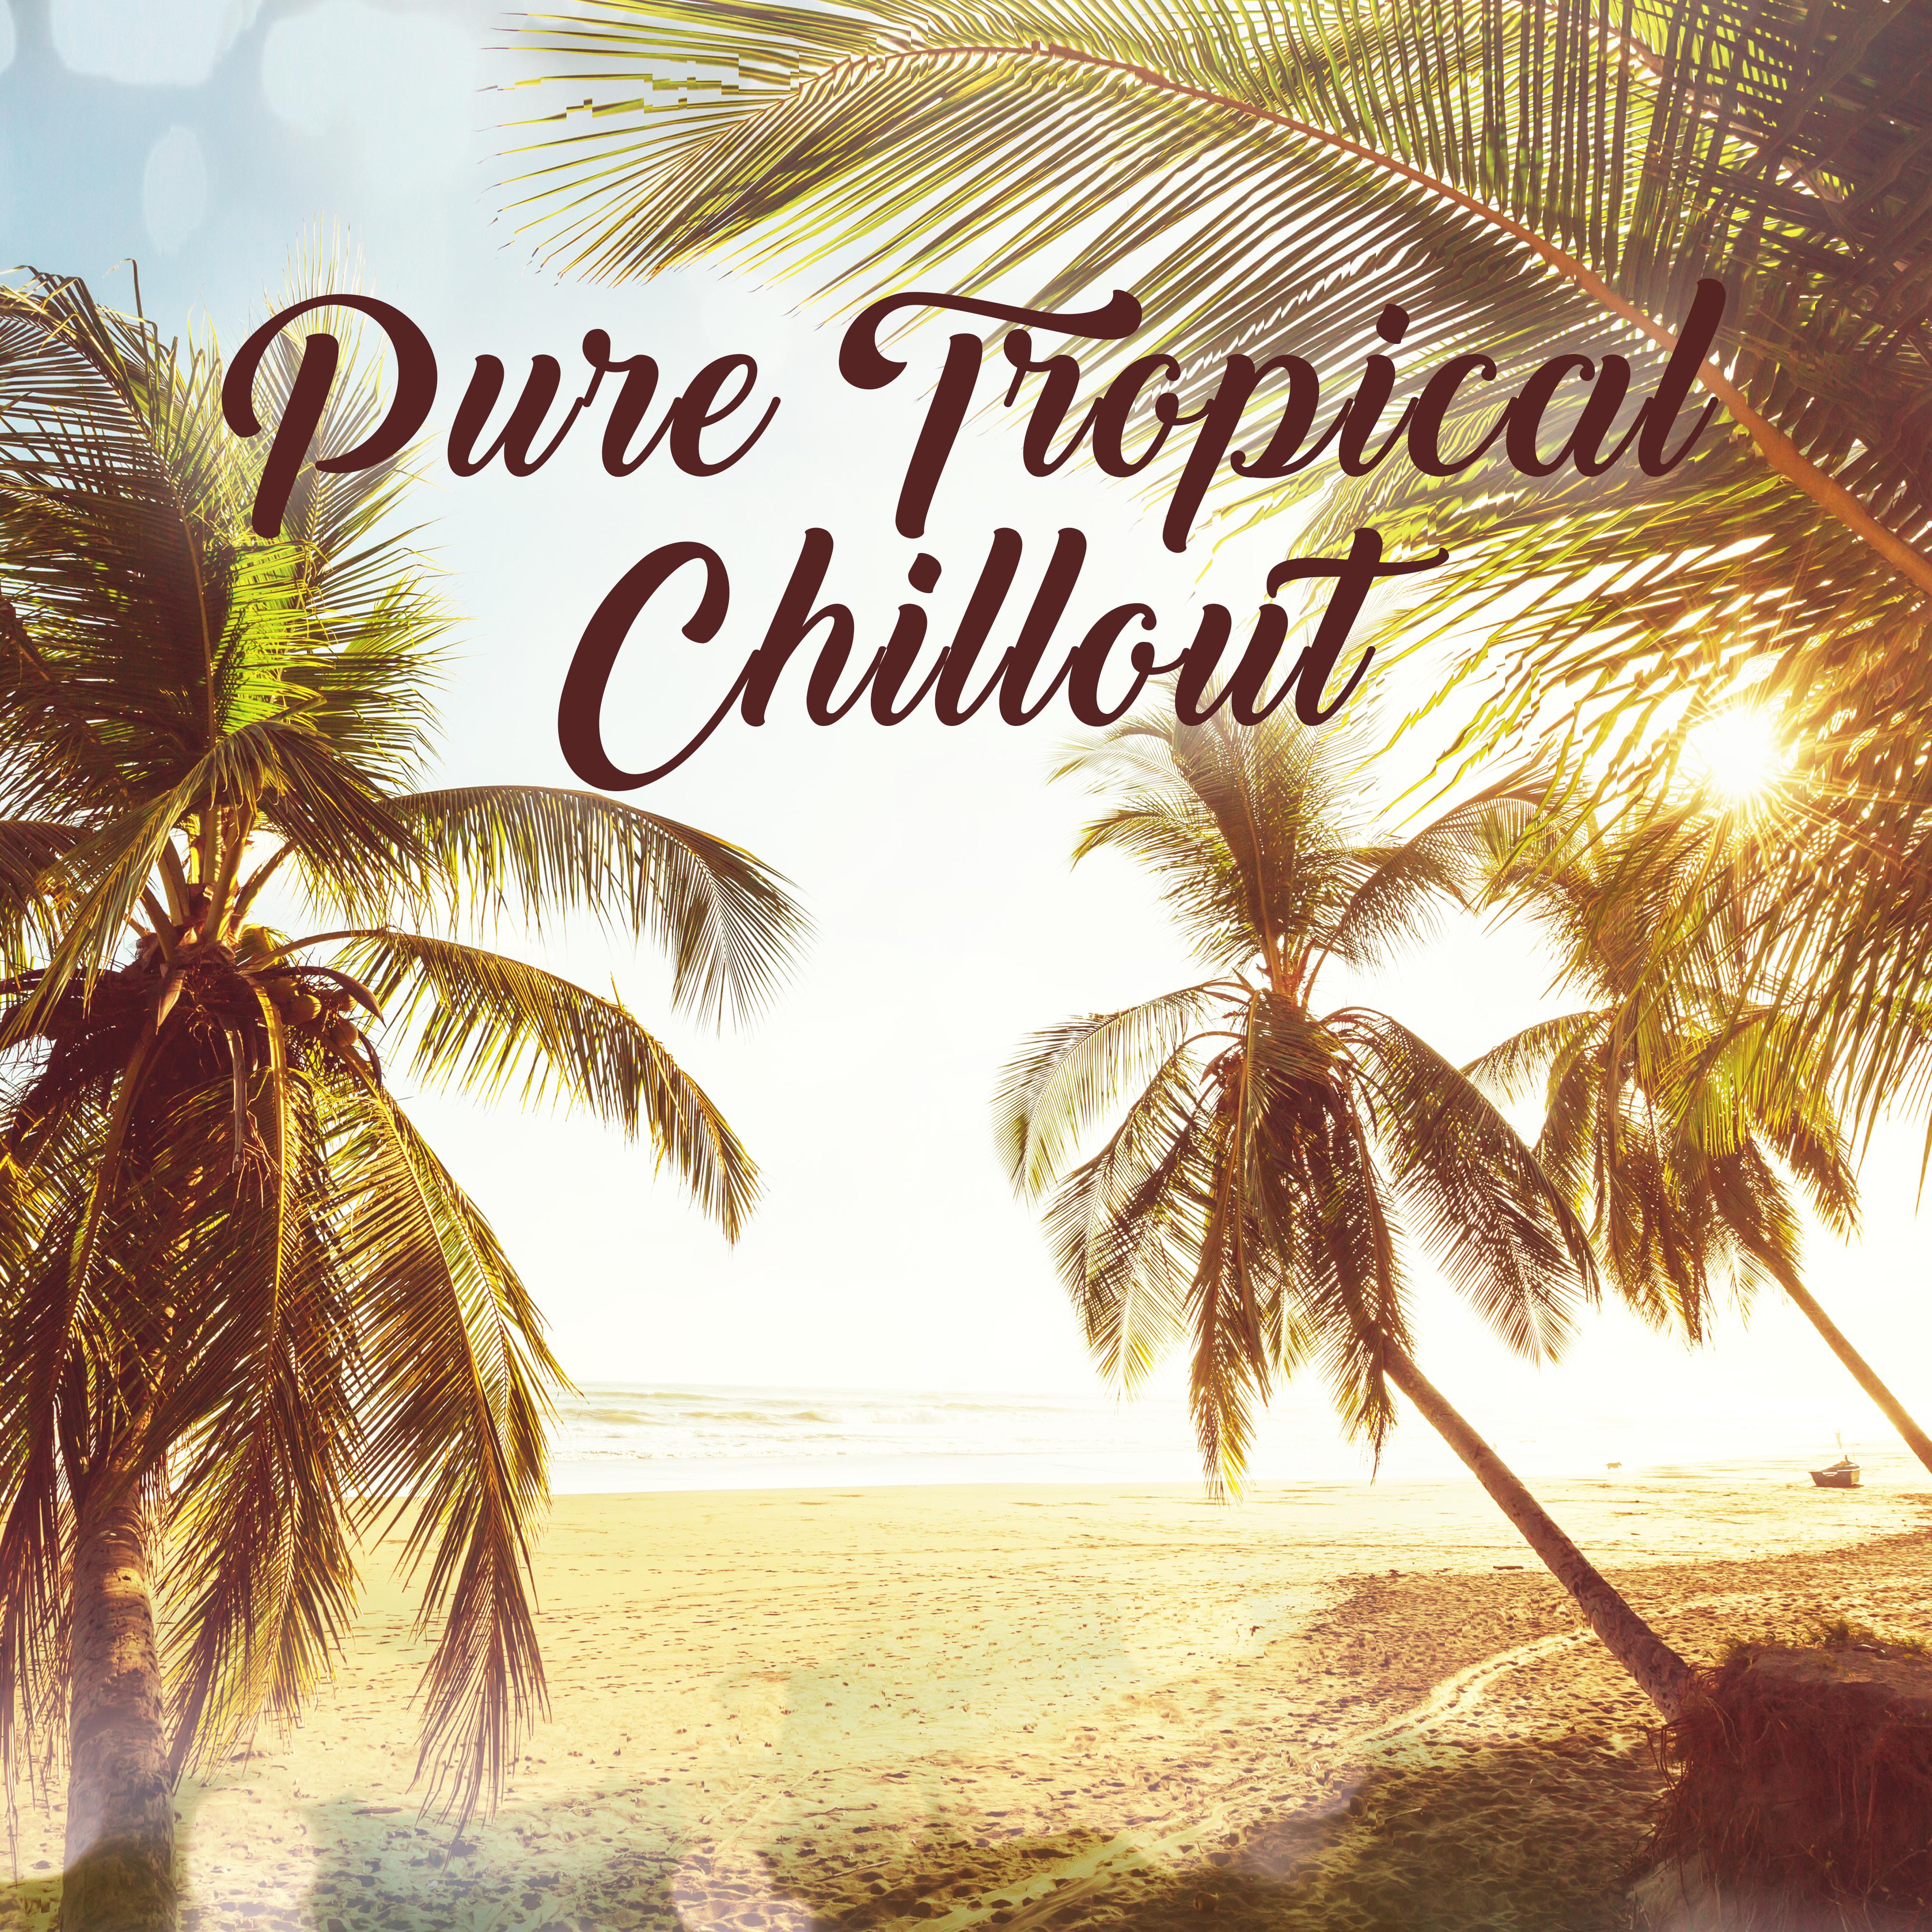 Pure Tropical Chillout